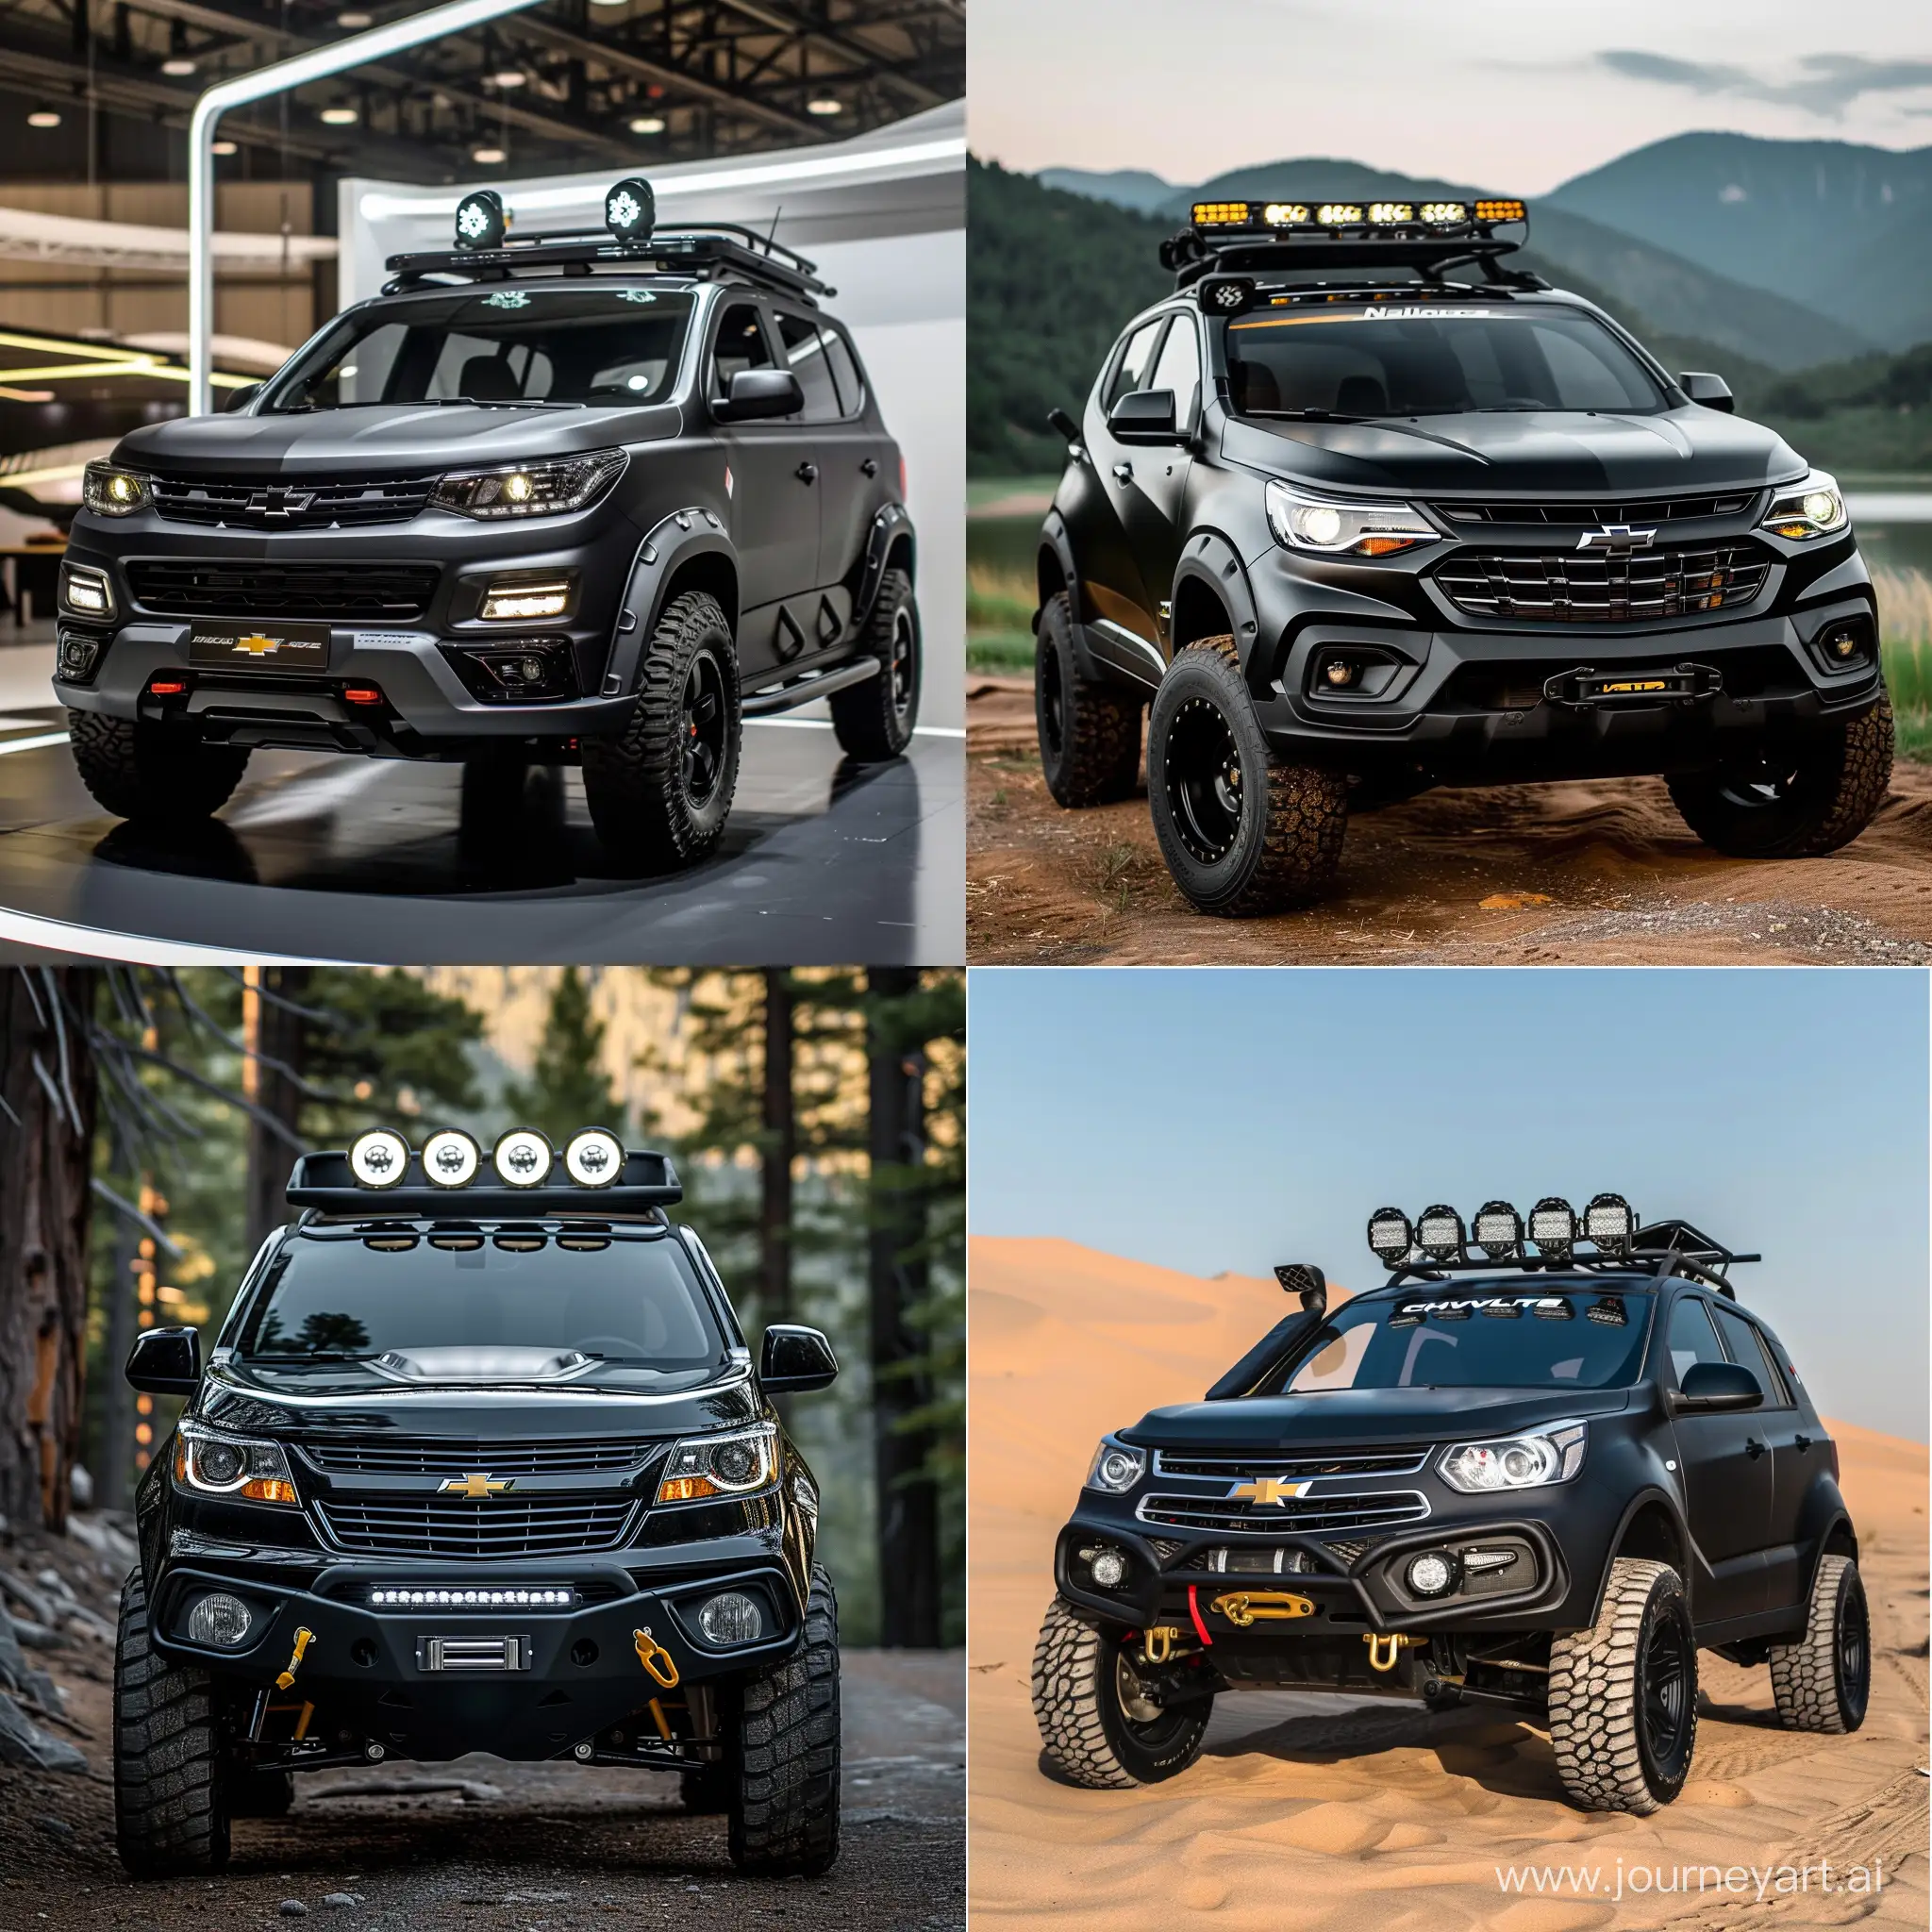 Customized-Chevrolet-Niva-V6-with-Unique-Features-Model-68422